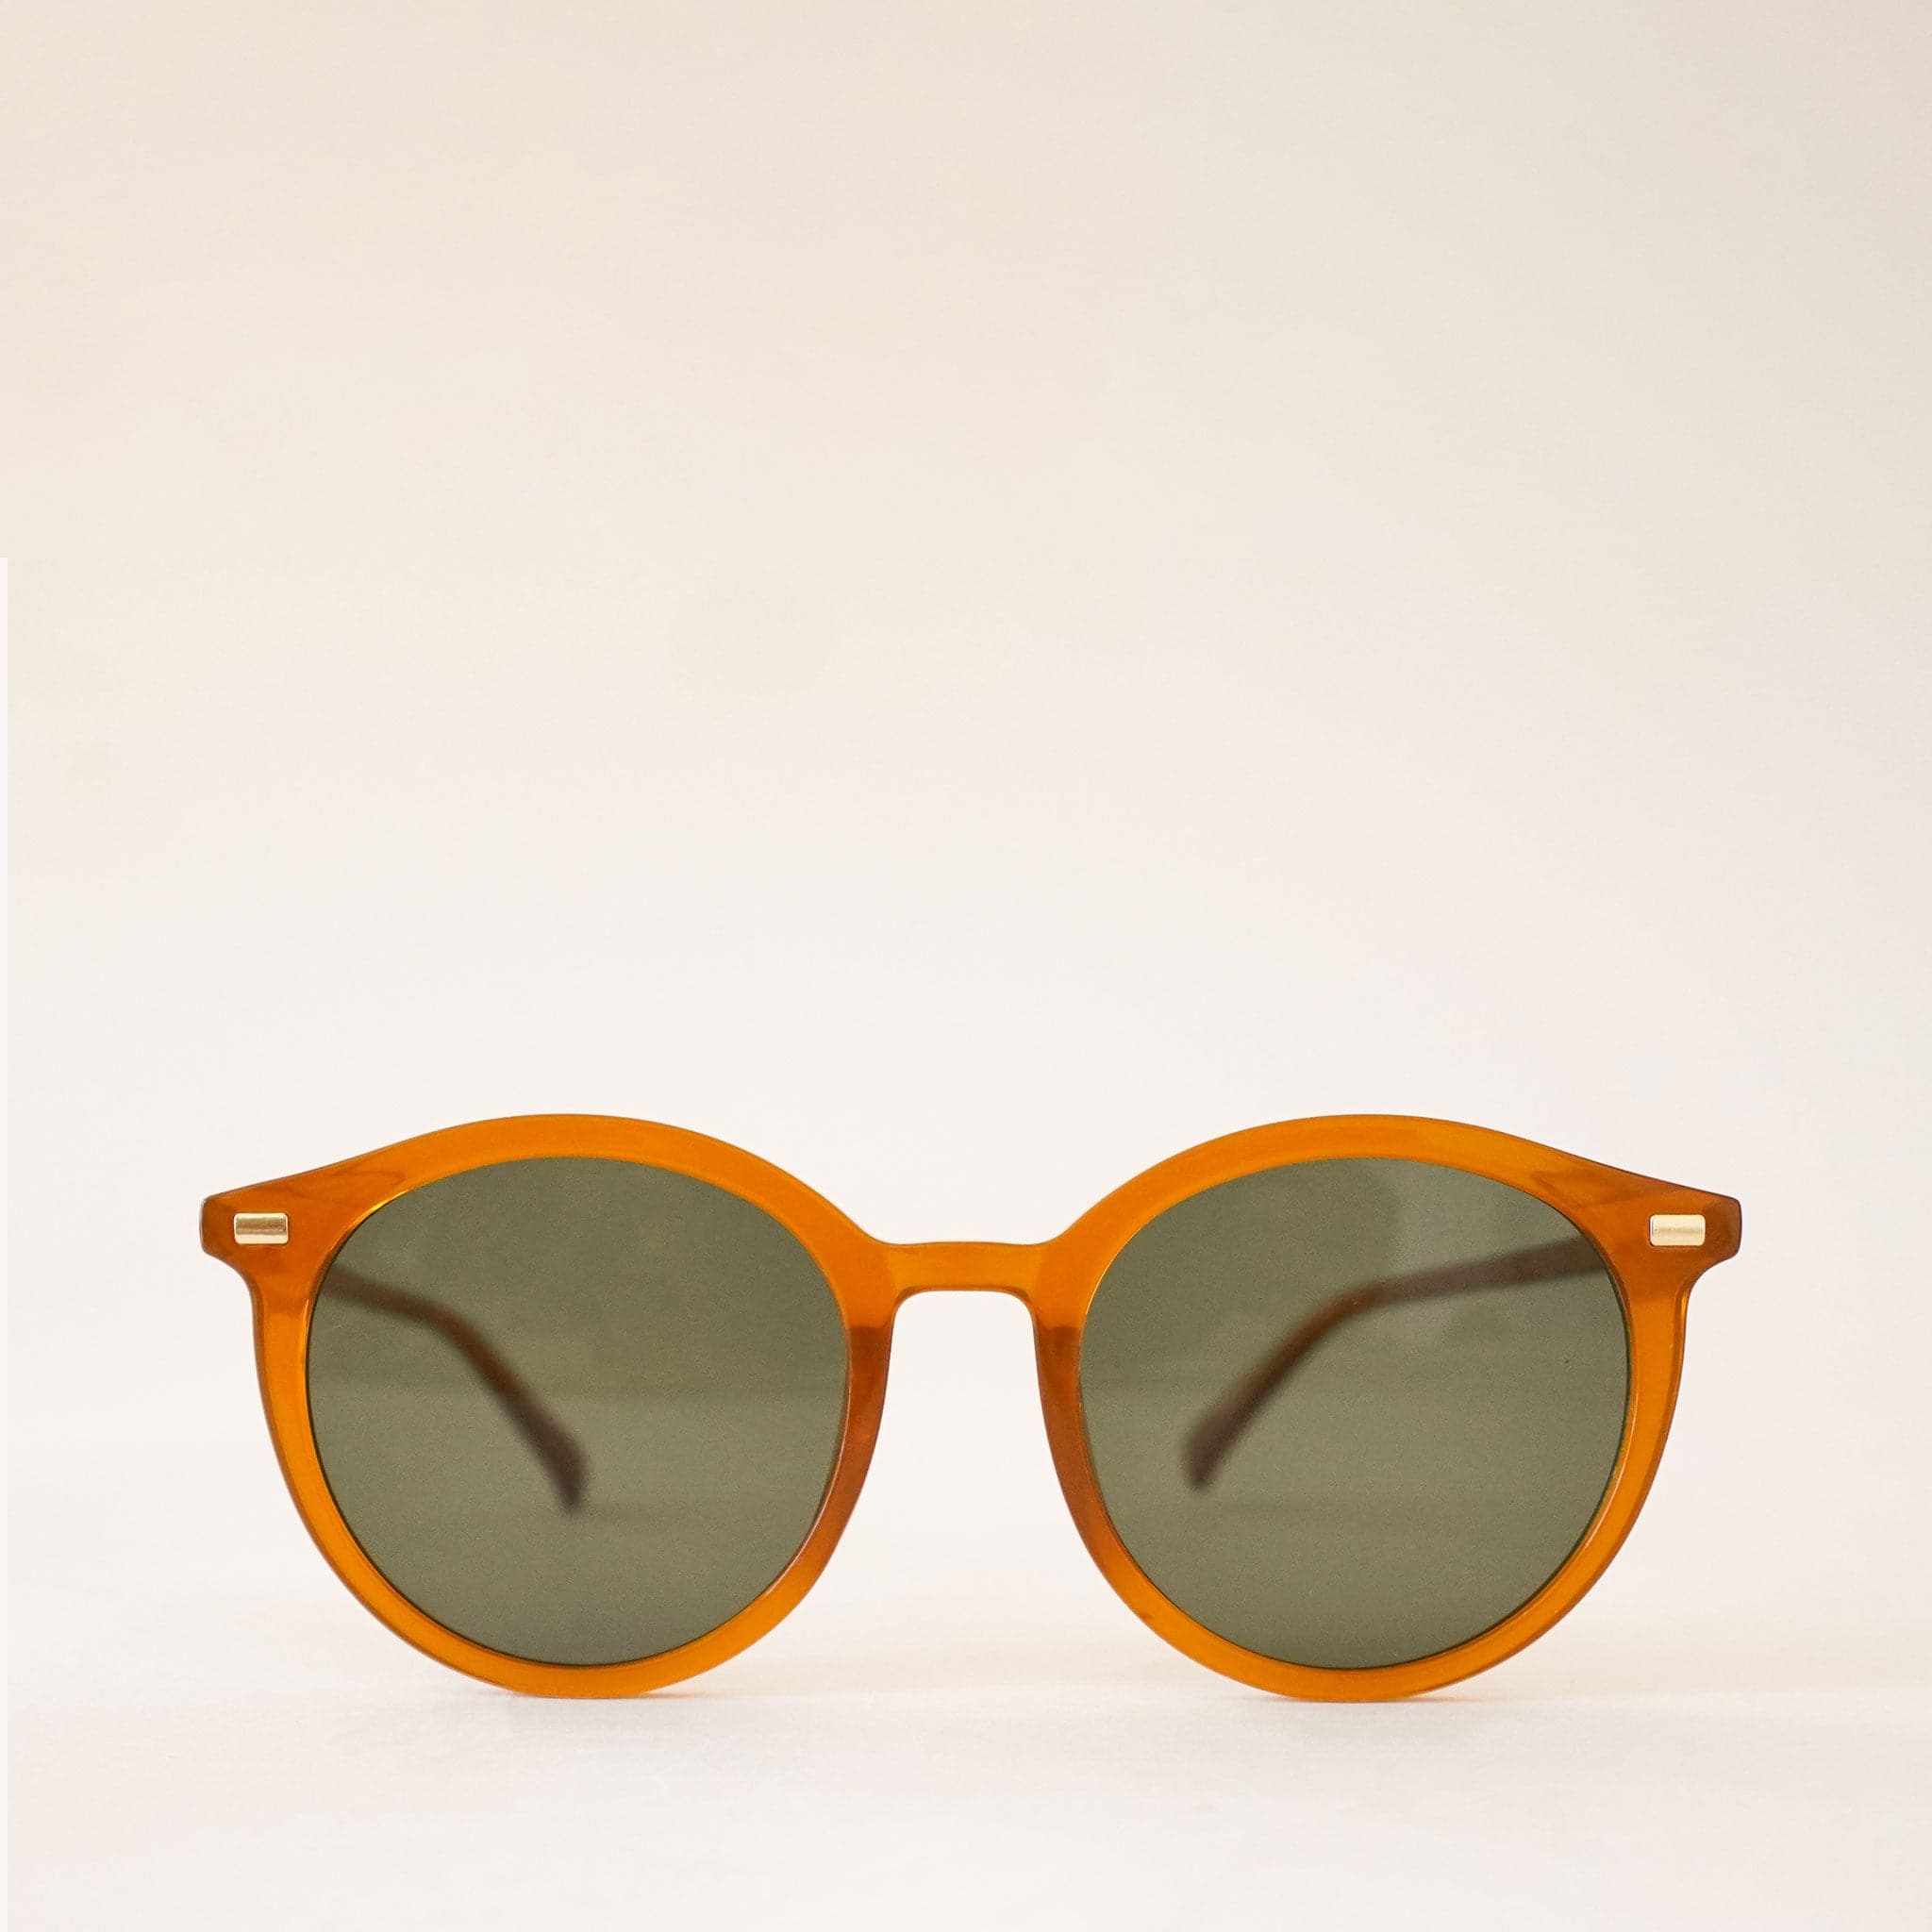 A thin rounded orange framed sunglass with a grey lens.